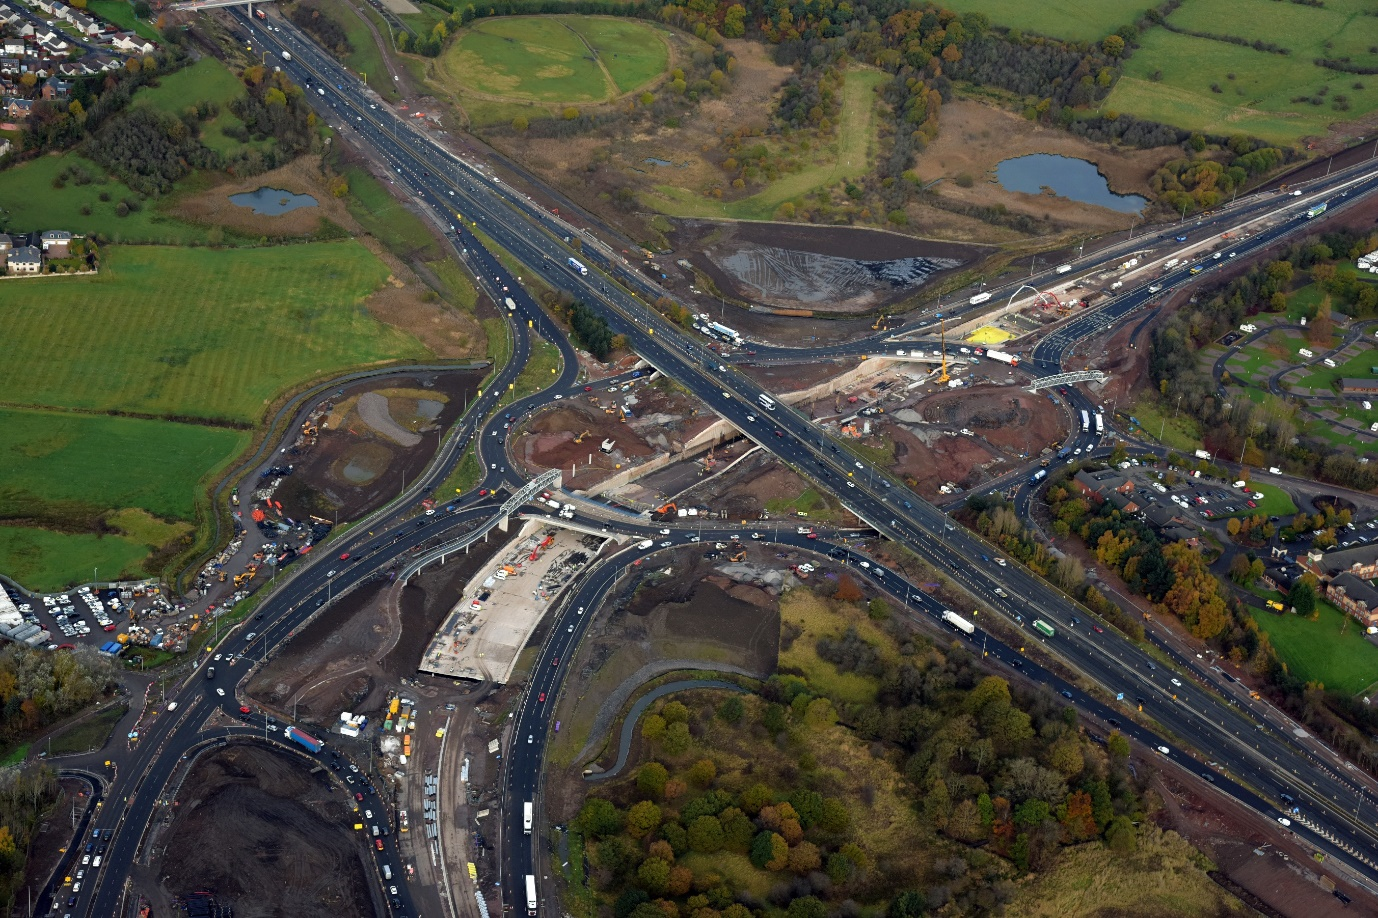 Aerial view of Raith Junction during construction circa Dec 2016, showing completion of piling and emergence of the A725 underpass below the M74